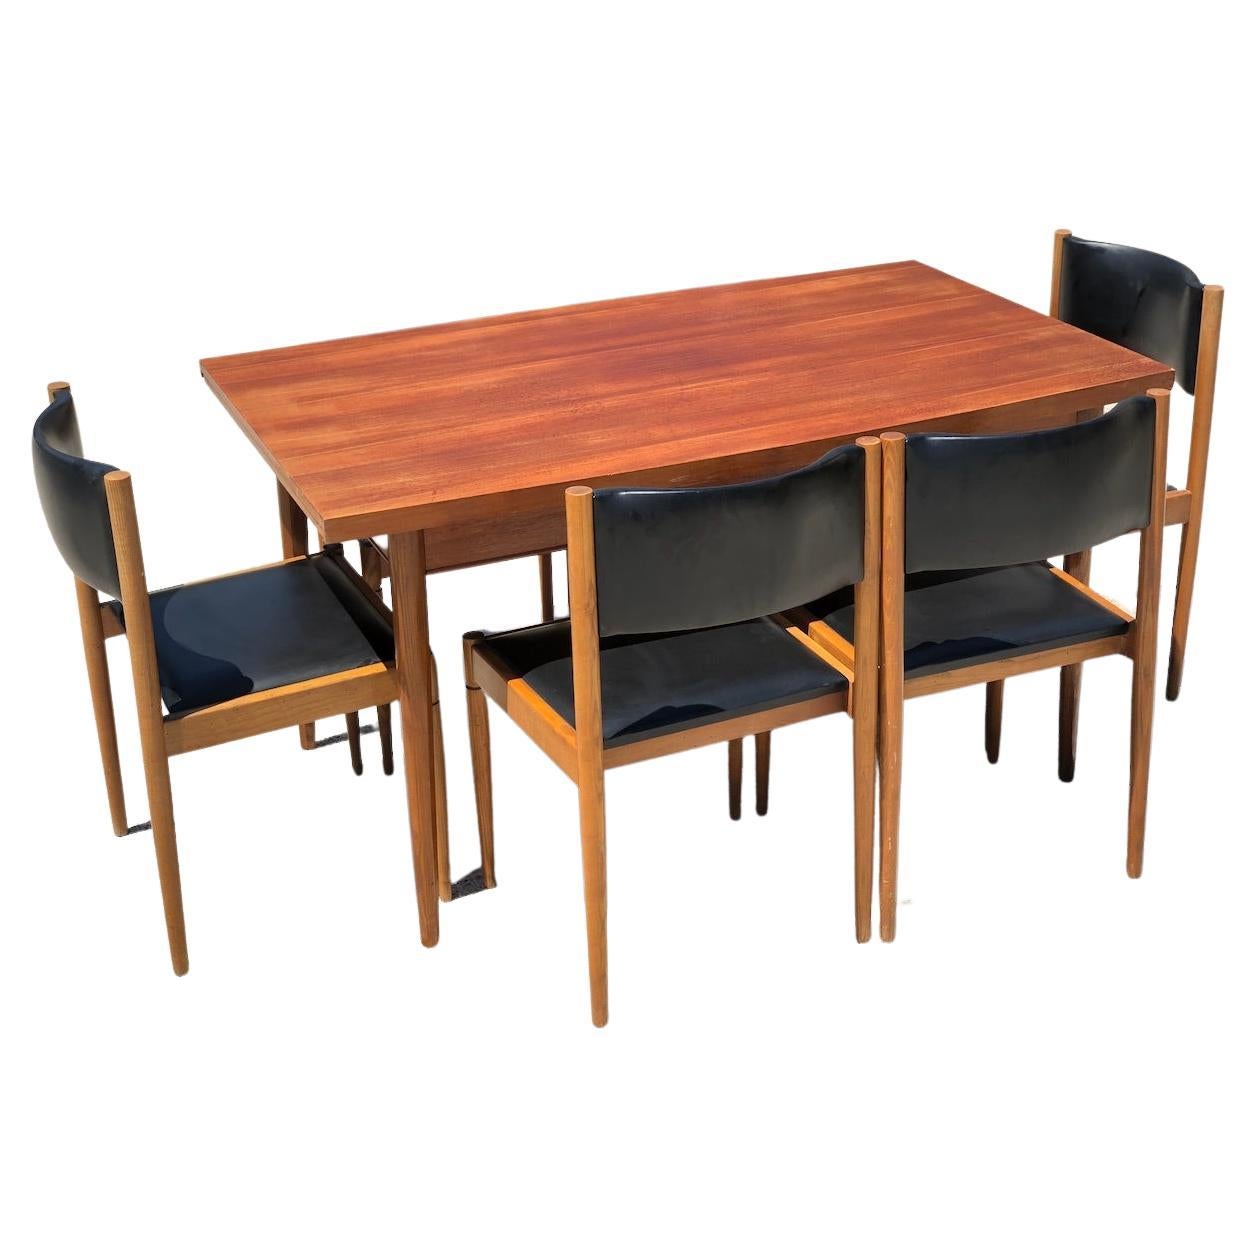  Scandinavian extendable teak table and 6 chairs set 1965 For Sale